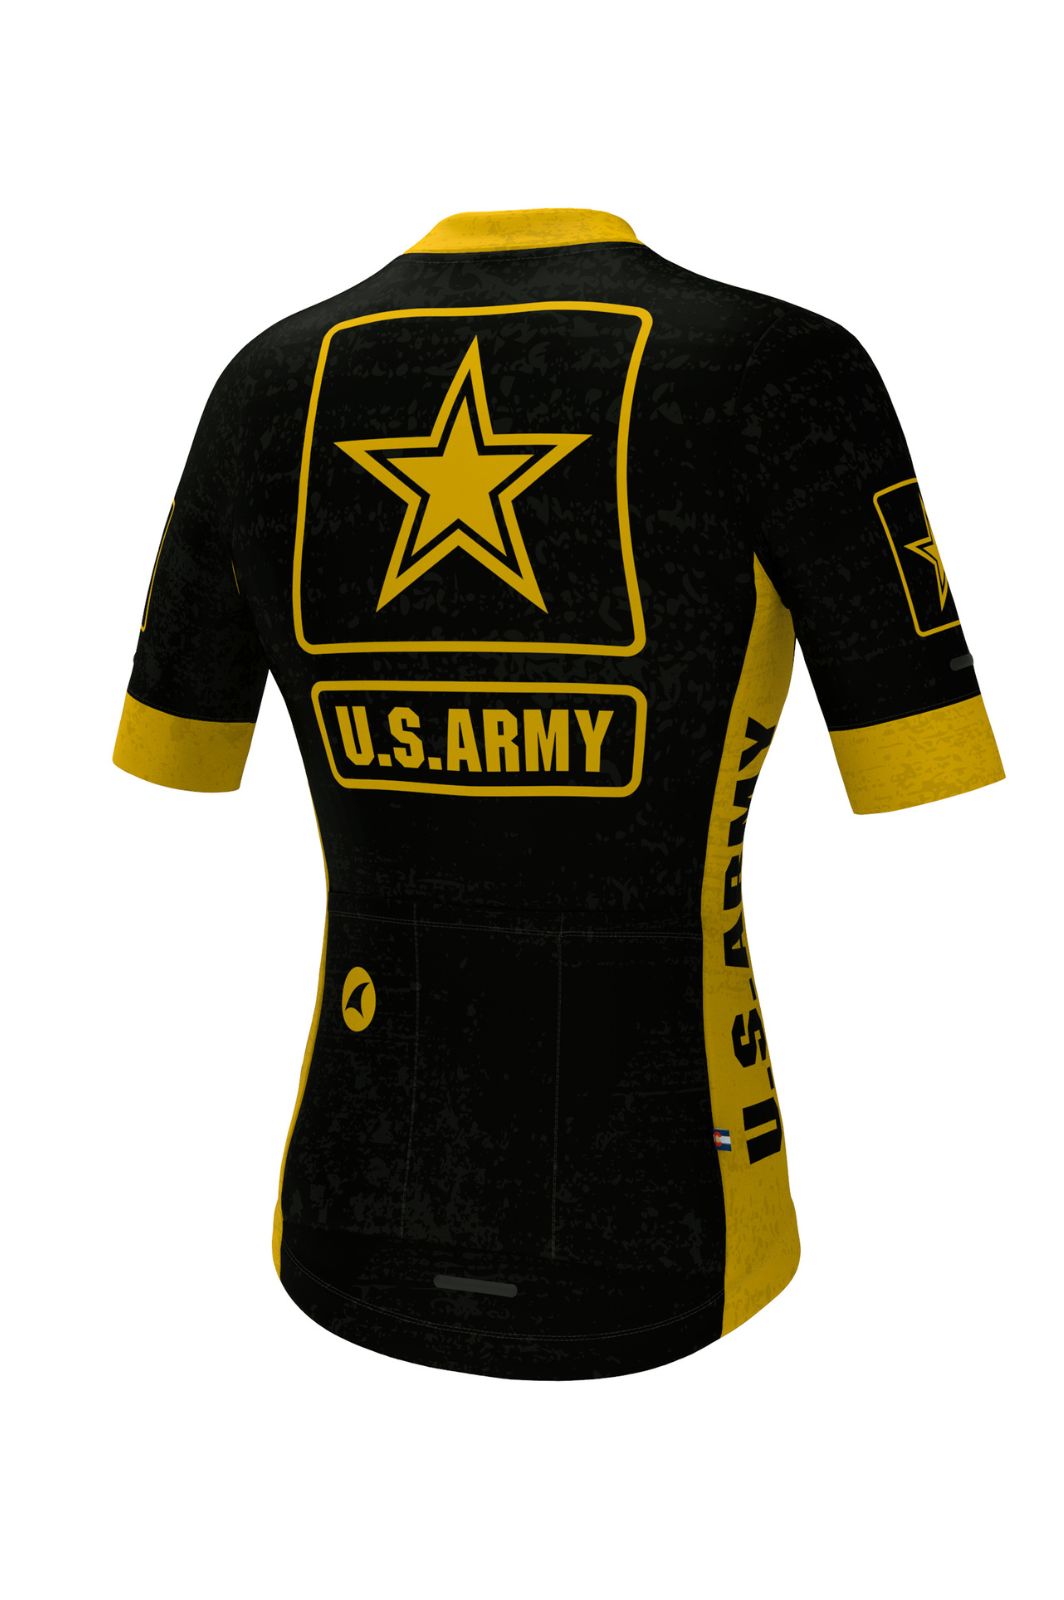 Women's US Army Cycling Jersey - Ascent Aero Back View